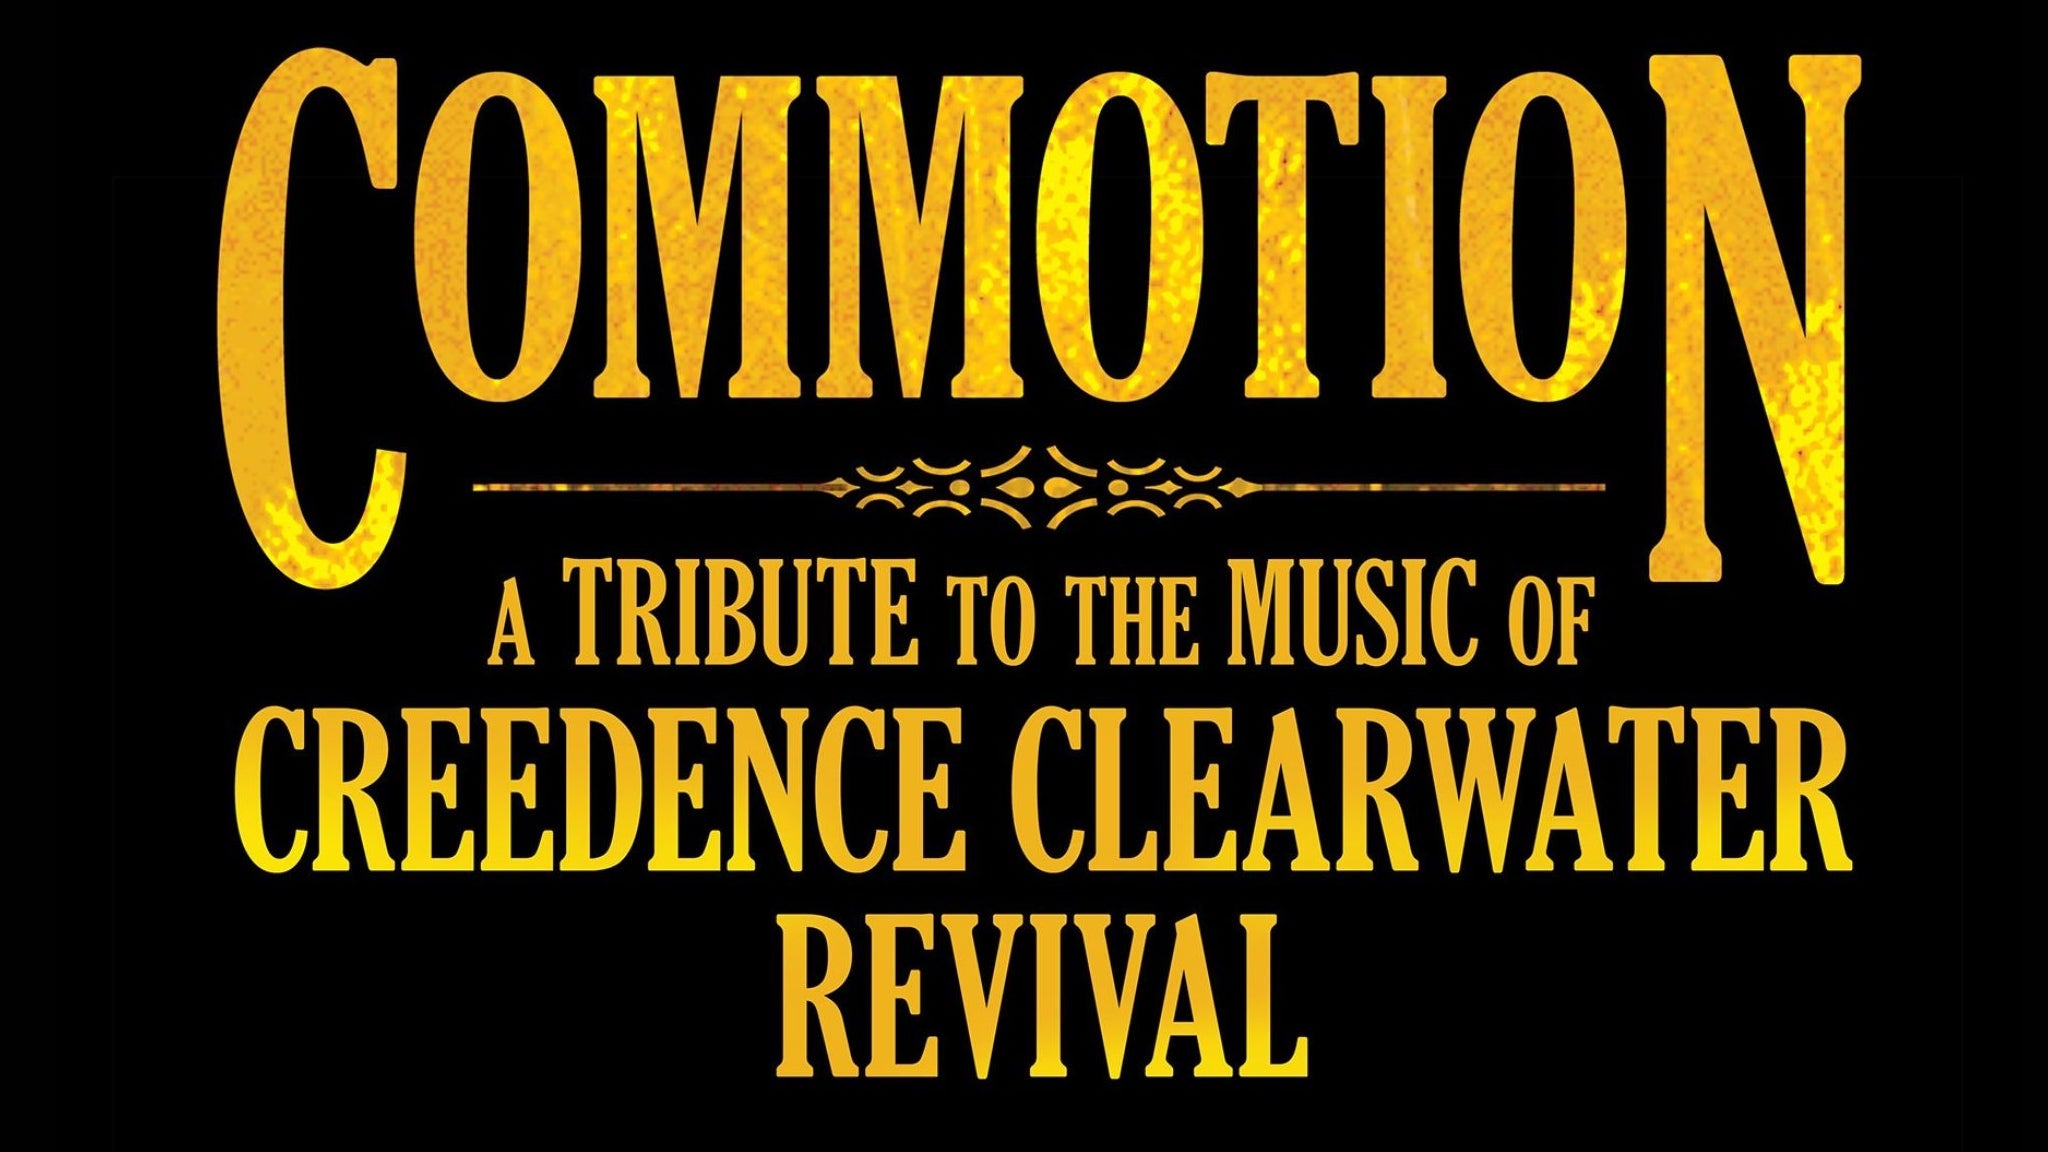 COMMOTION - A Tribute to the Music of Creedence Clearwater Revival presales in Ottumwa